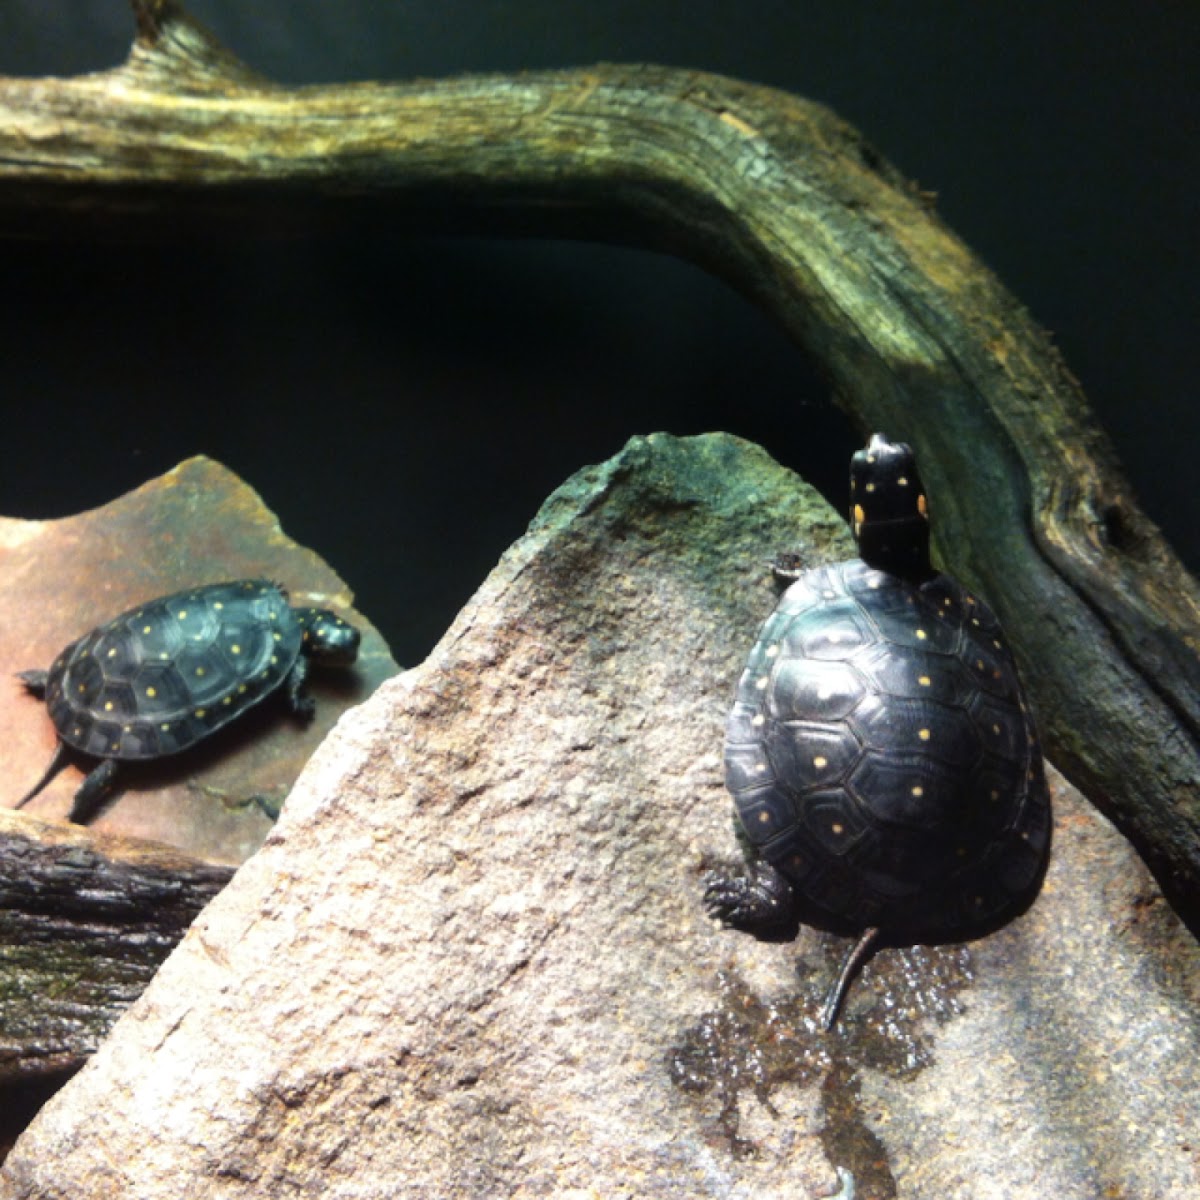 Spotted turtles